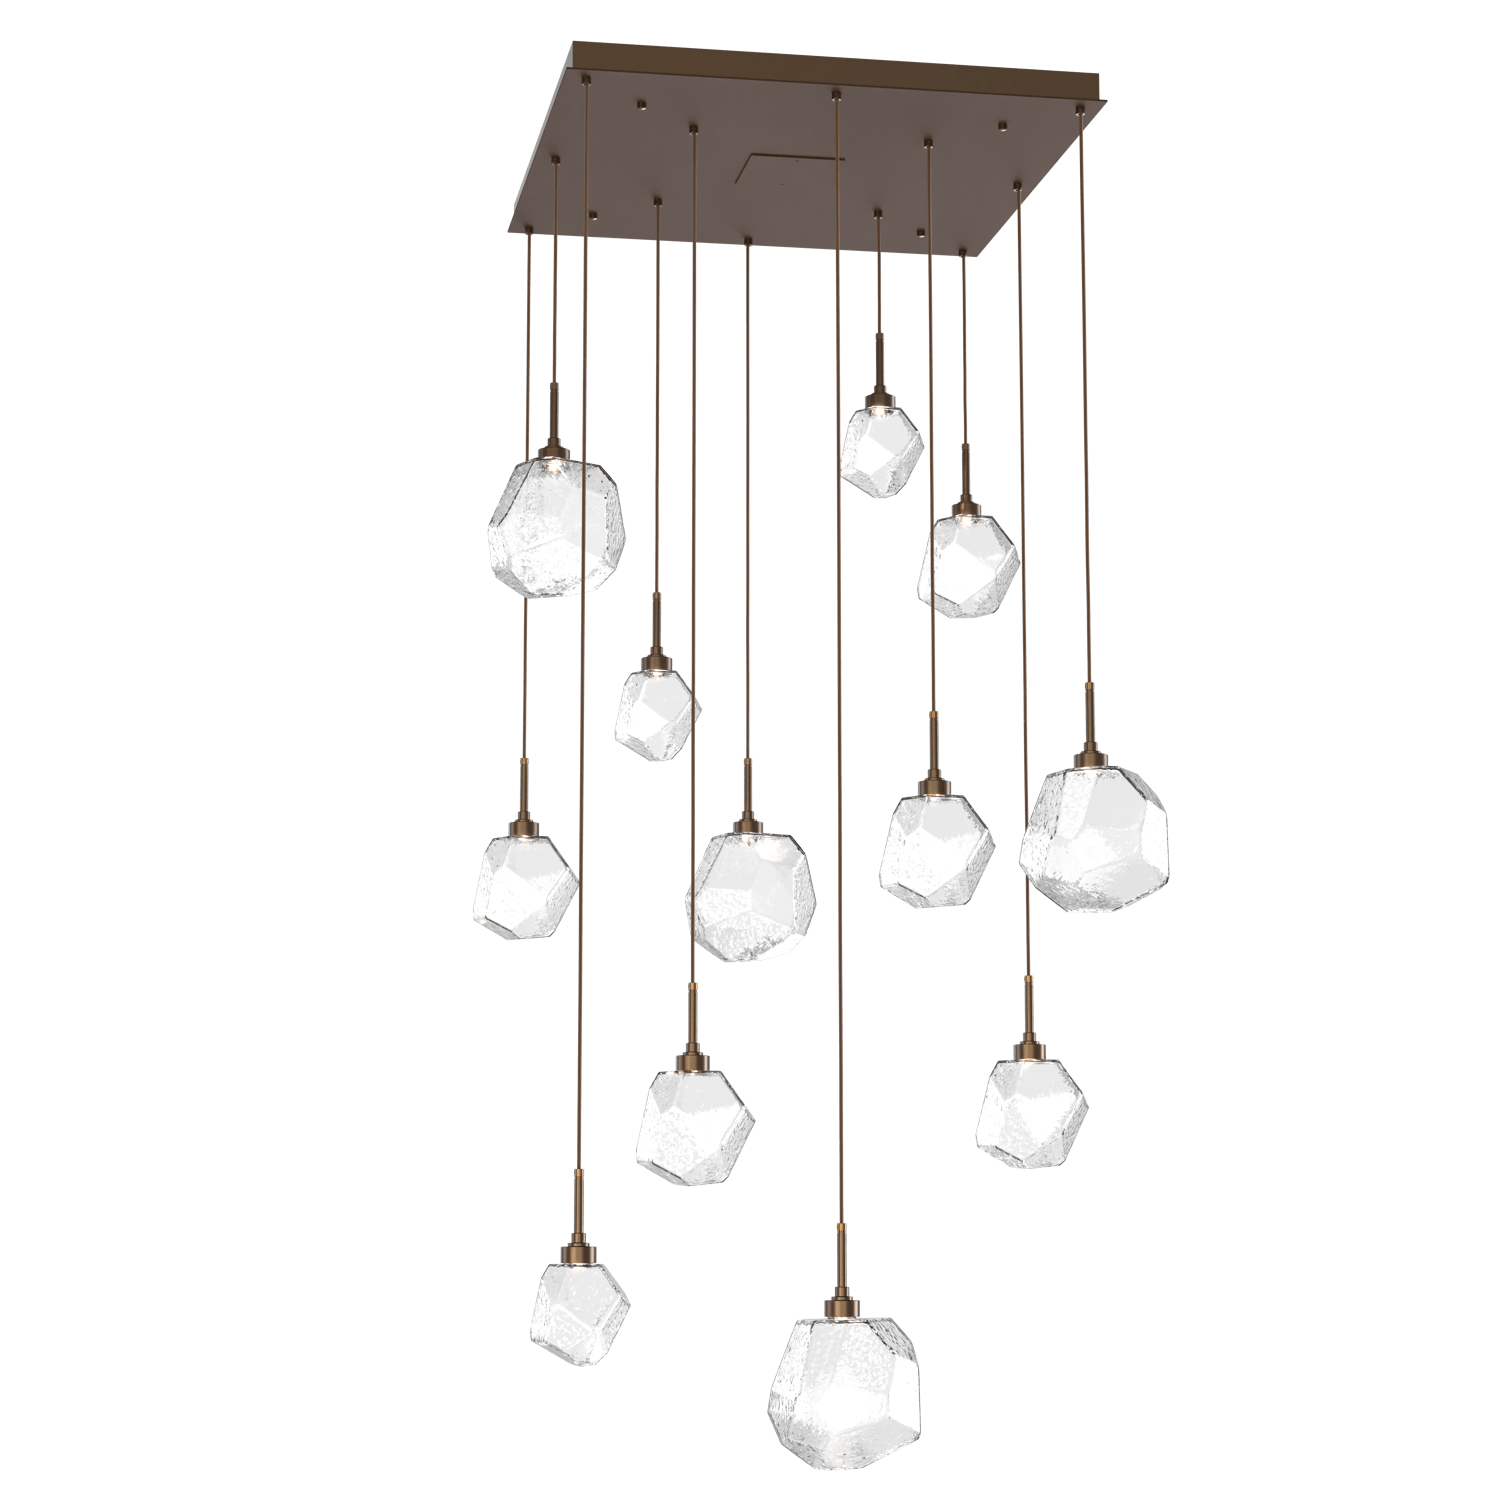 CHB0039-12-FB-C-Hammerton-Studio-Gem-12-light-square-pendant-chandelier-with-flat-bronze-finish-and-clear-blown-glass-shades-and-LED-lamping